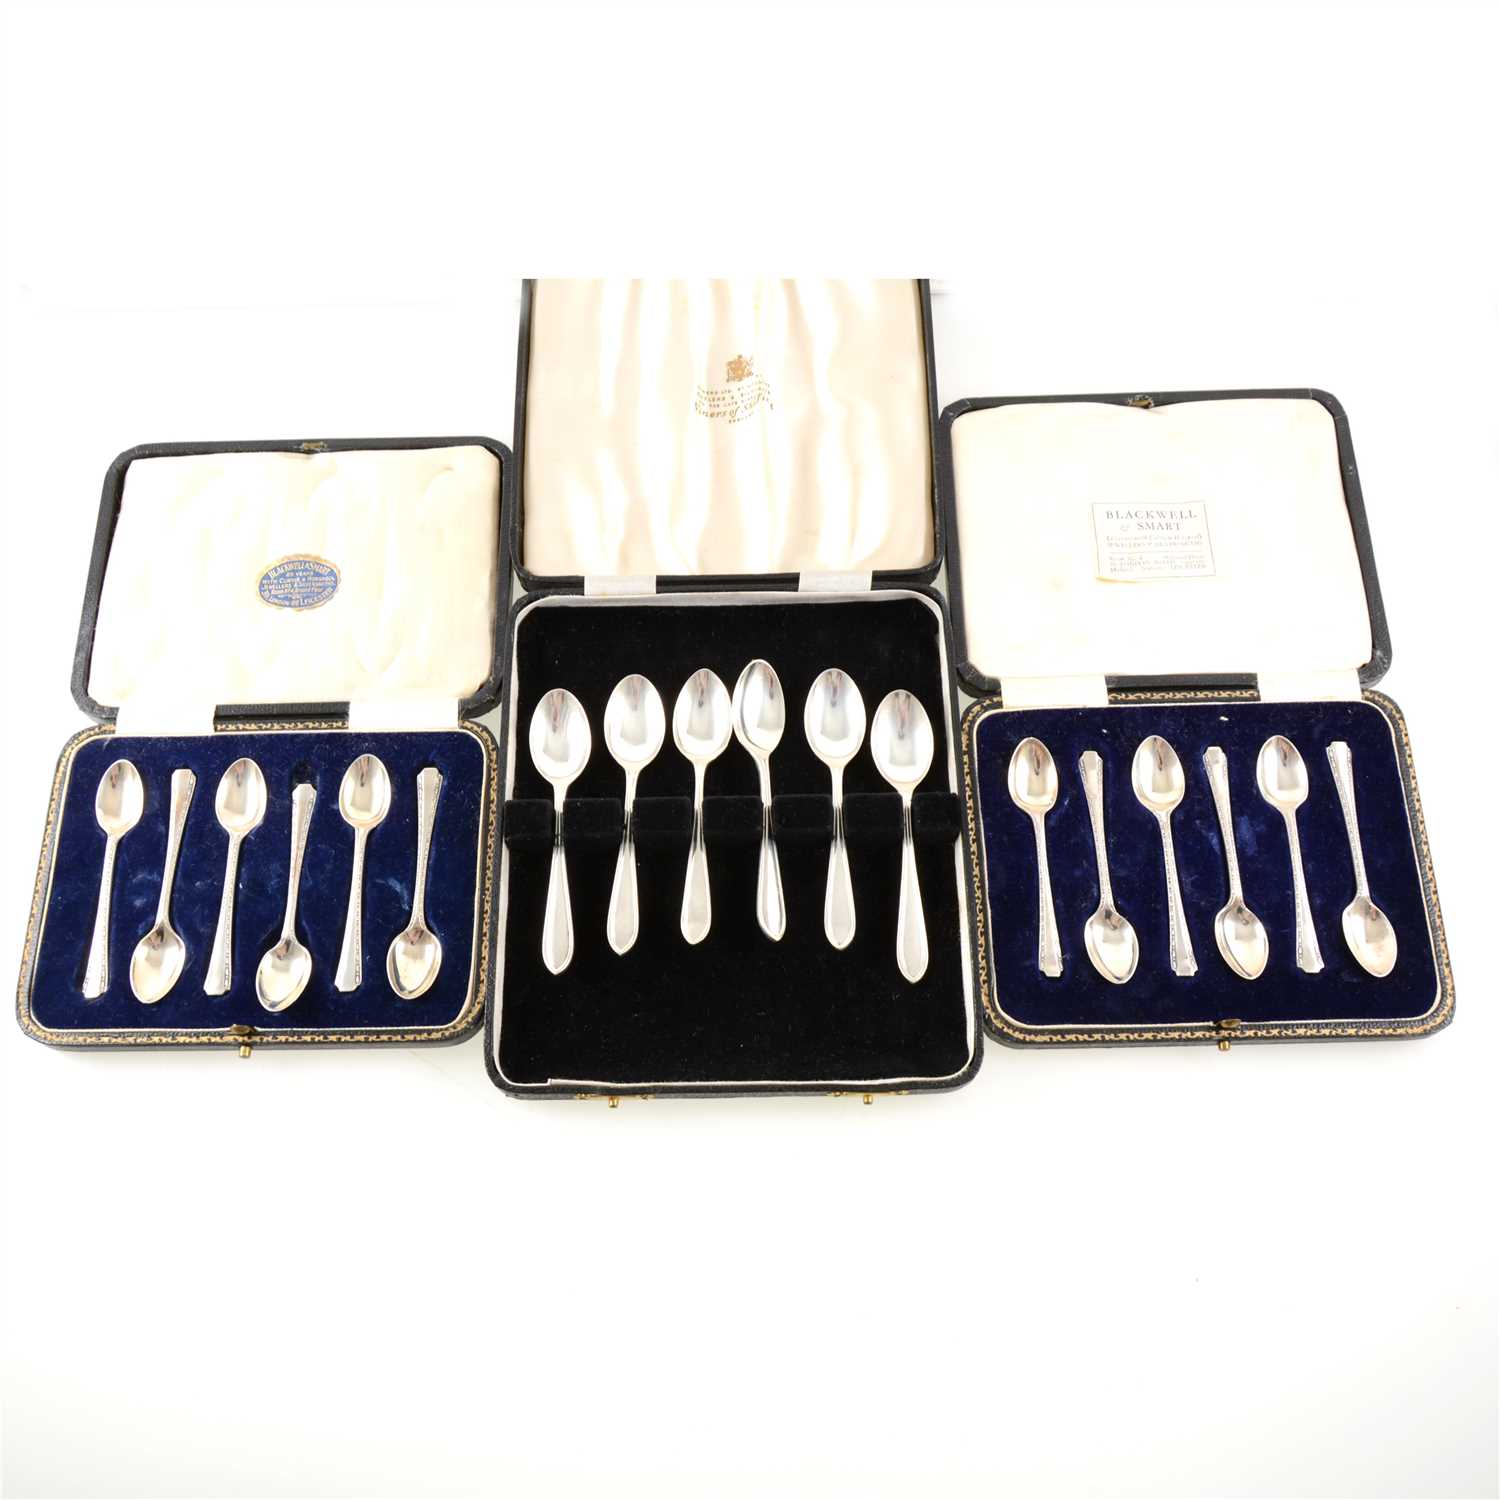 Lot 202 - A cased set of six silver teaspoons by Viner's Ltd (Emile Viner), Sheffield 1961, another cased set by Cooper Brothers & Sons Ltd, Sheffield 1921, and two cased sets of six silver coffee spoons